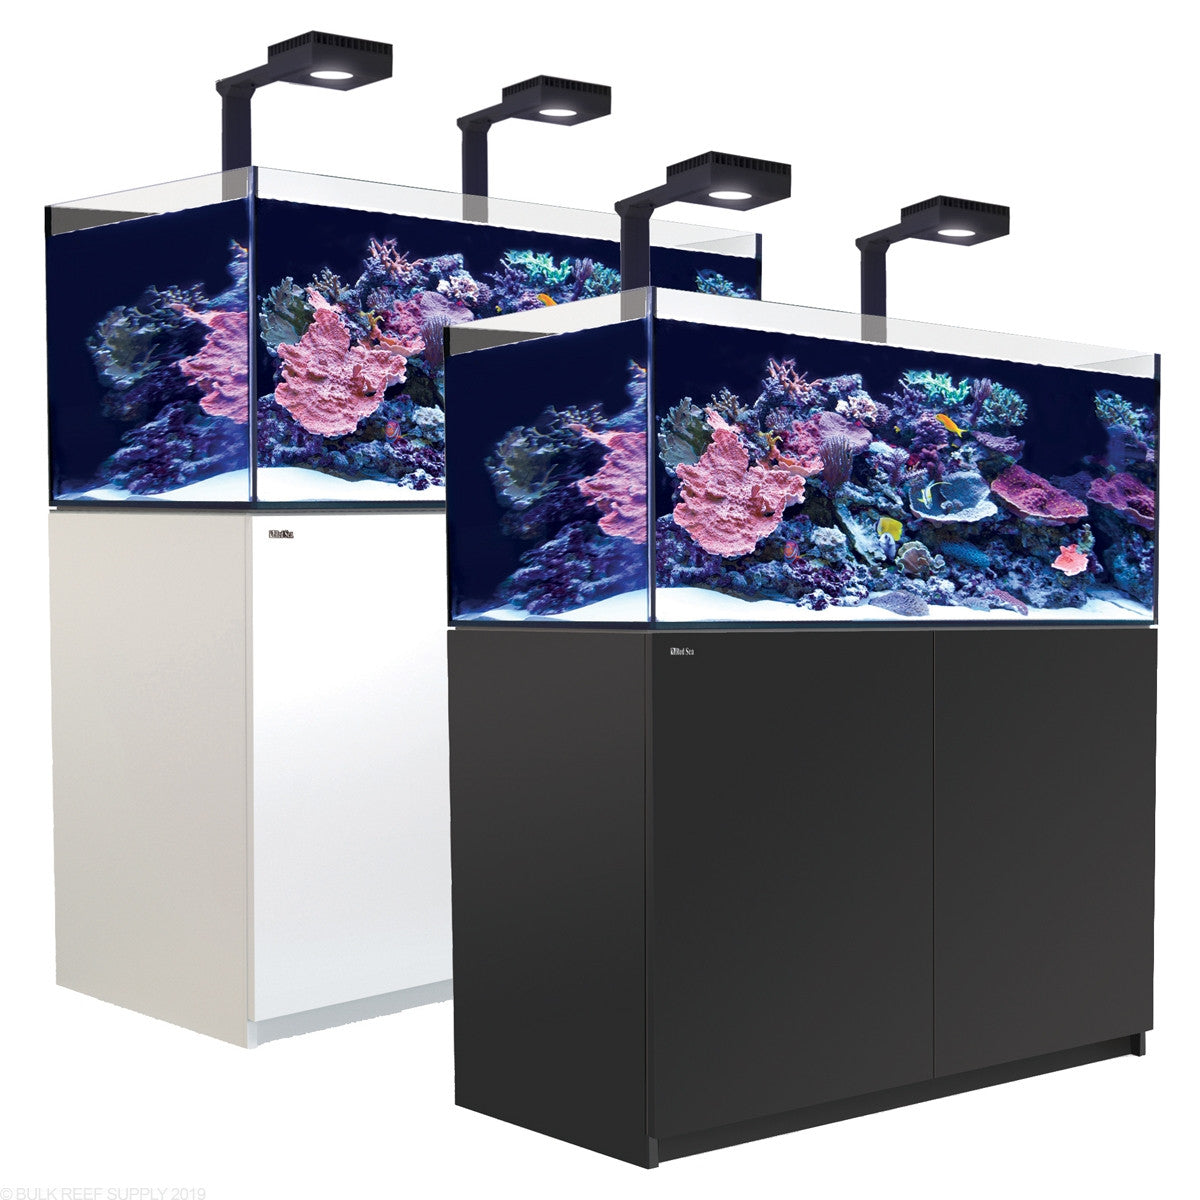 RedSea Reefer G2 XL 425 Deluxe [ Incl 2x ReefLED 90 ]